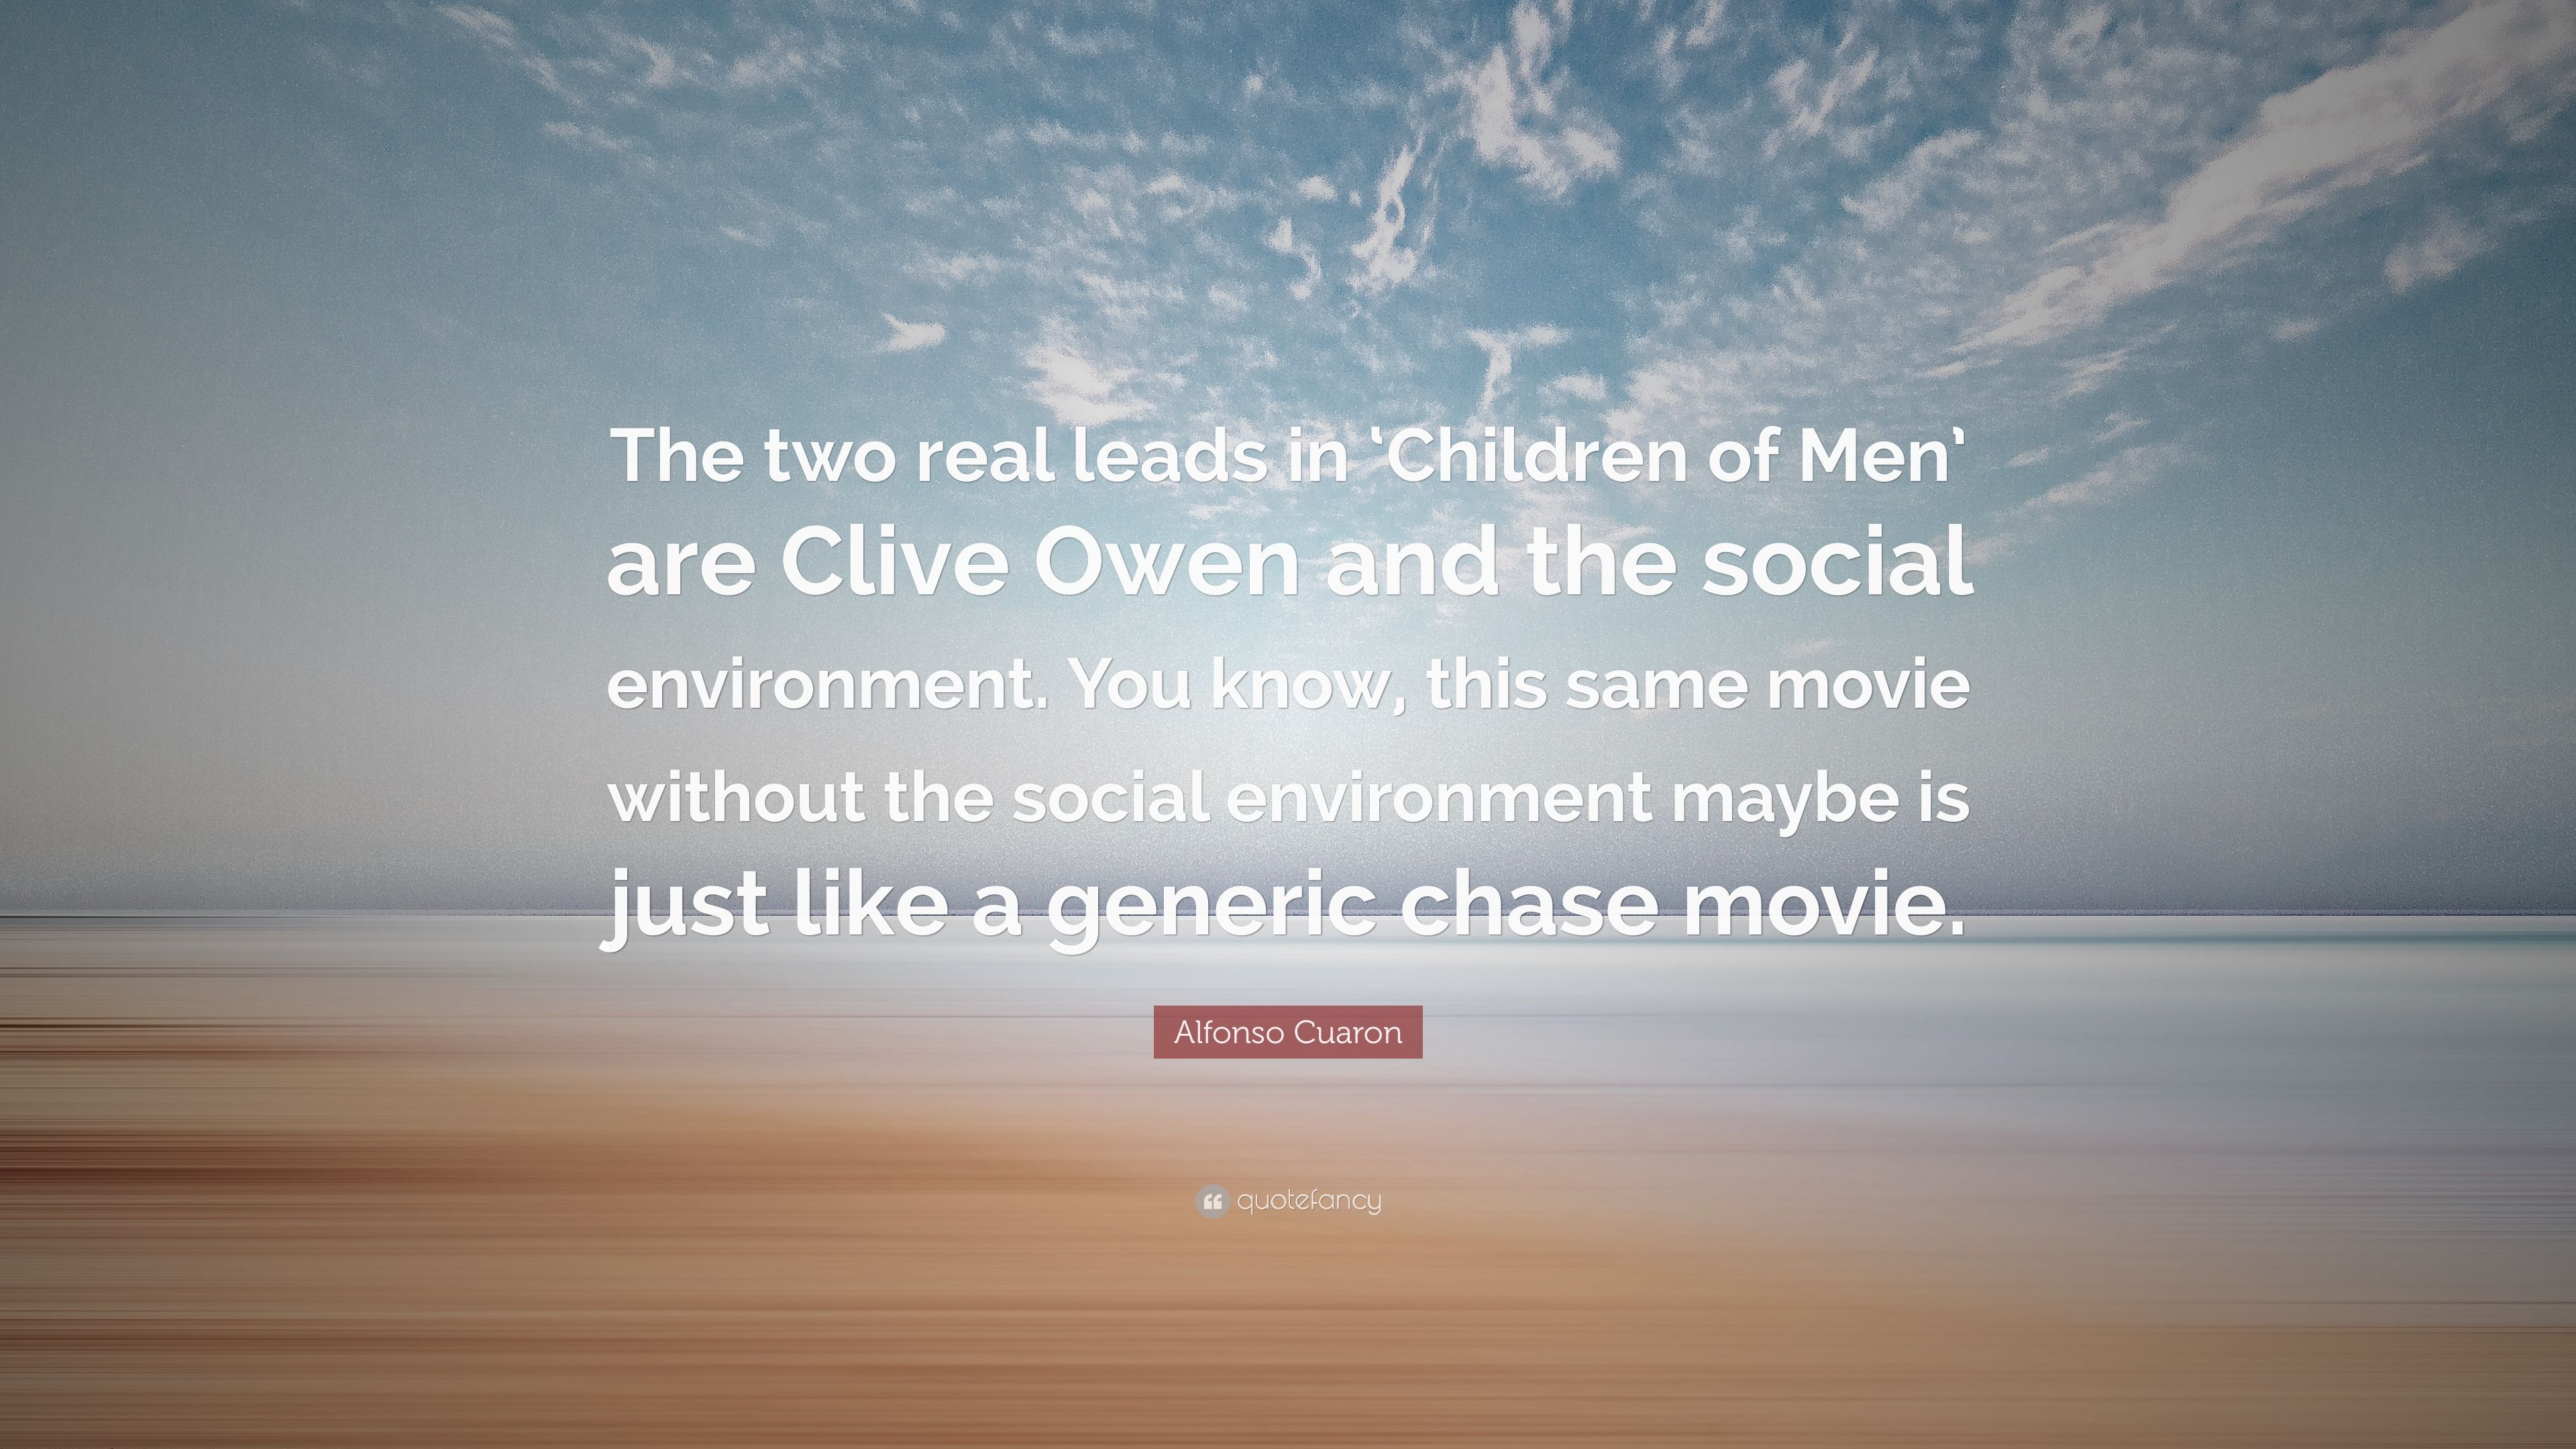 Alfonso Cuaron Quote: “The two real leads in 'Children of Men' are